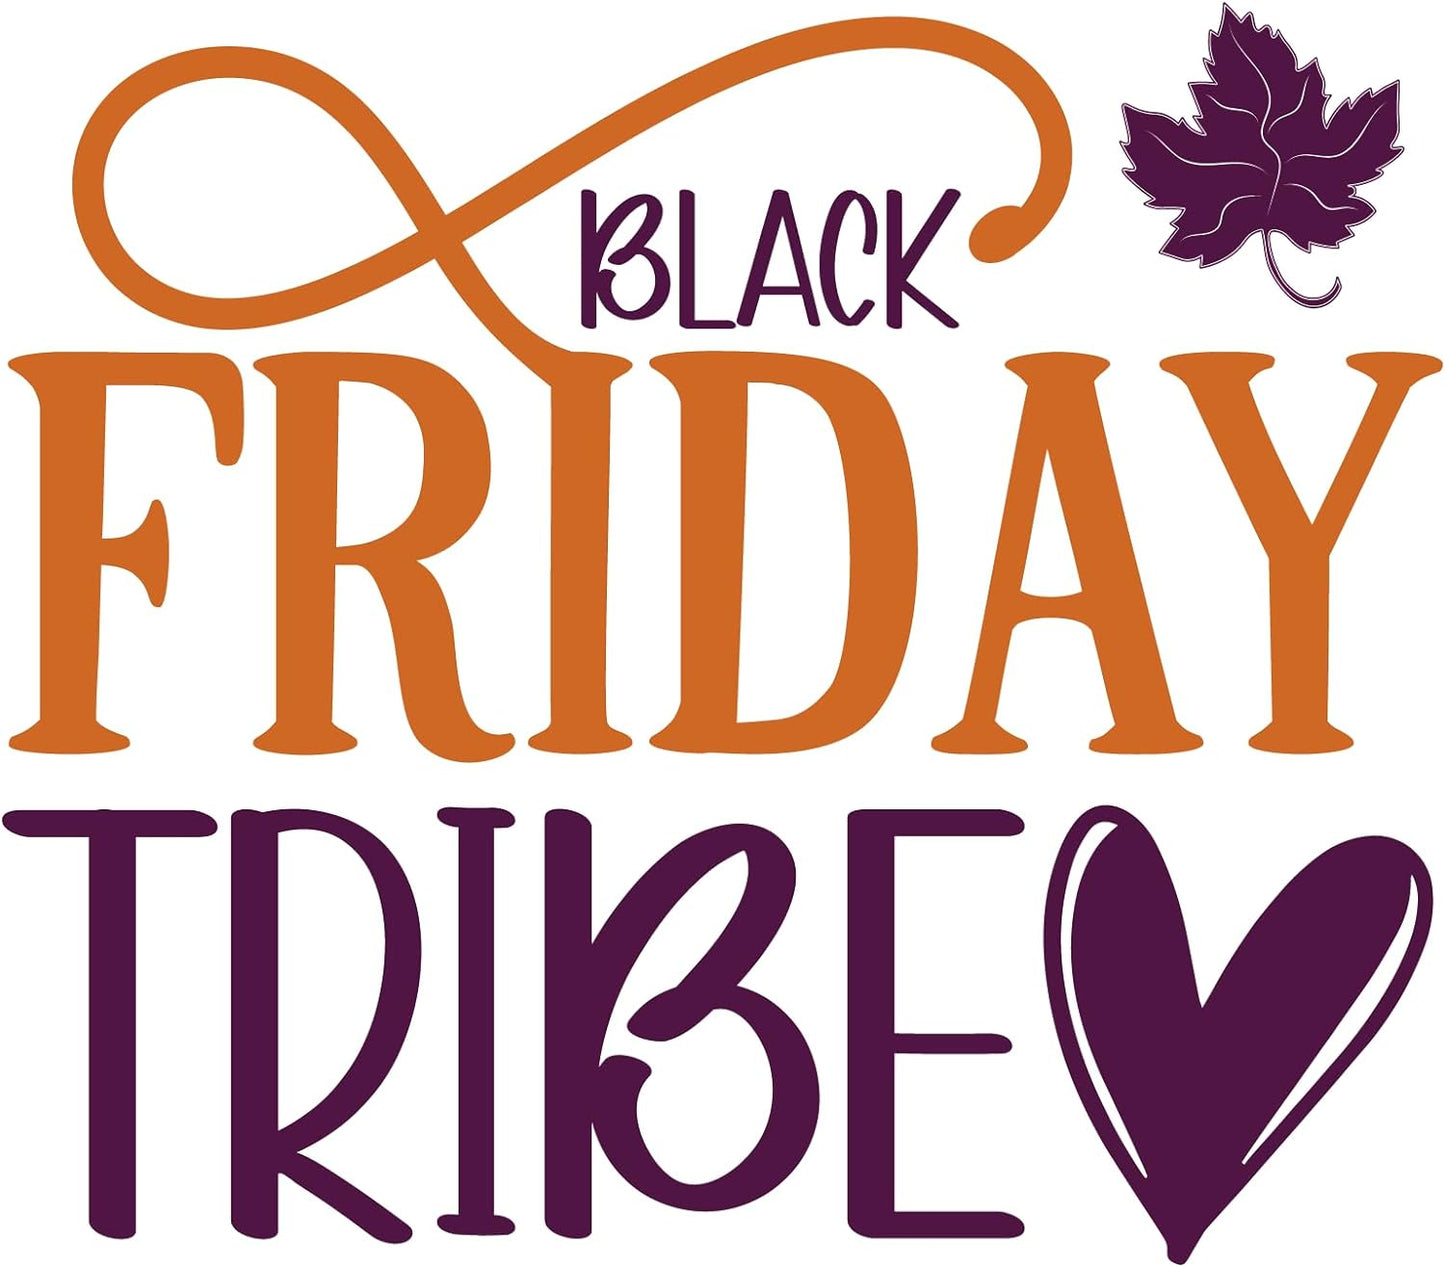 Inspirational Quote Black Friday Tribe Motivational Sticker Vinyl Decal Motivation Stickers- 5" Vinyl Sticker Waterproof